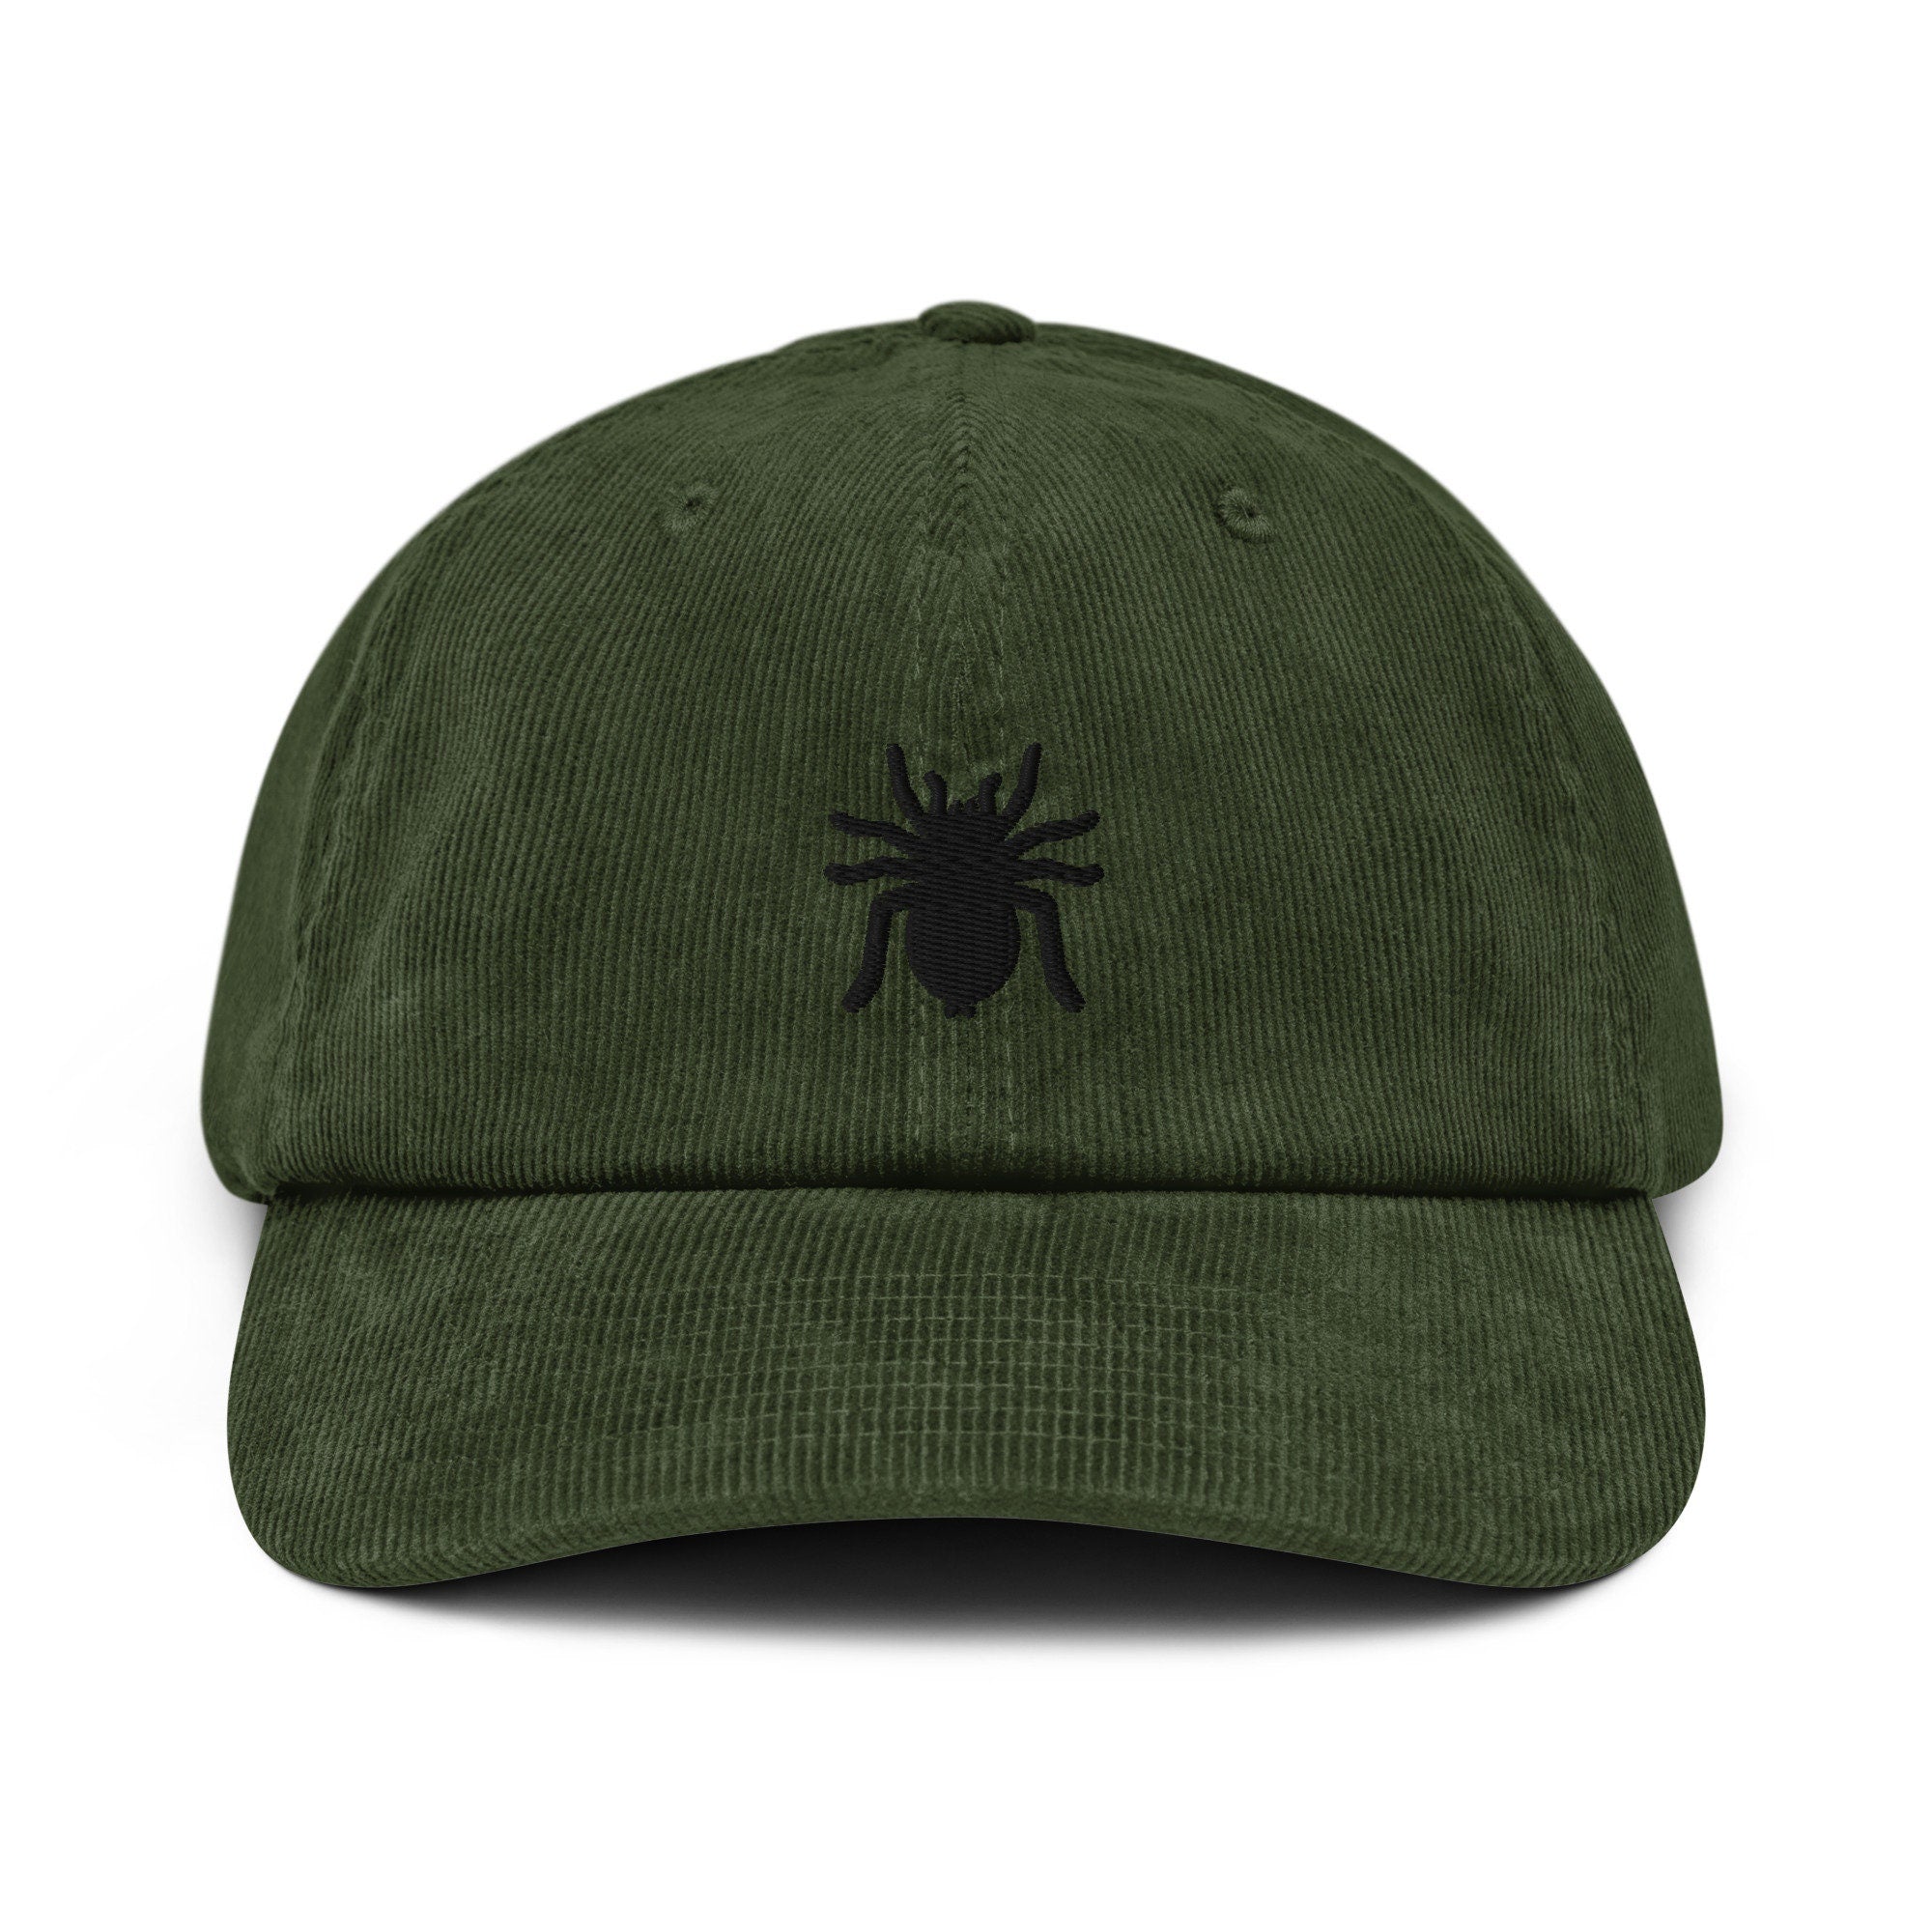 Spider Corduroy Hat, Handmade Embroidered Corduroy Dad Cap - Multiple Colors